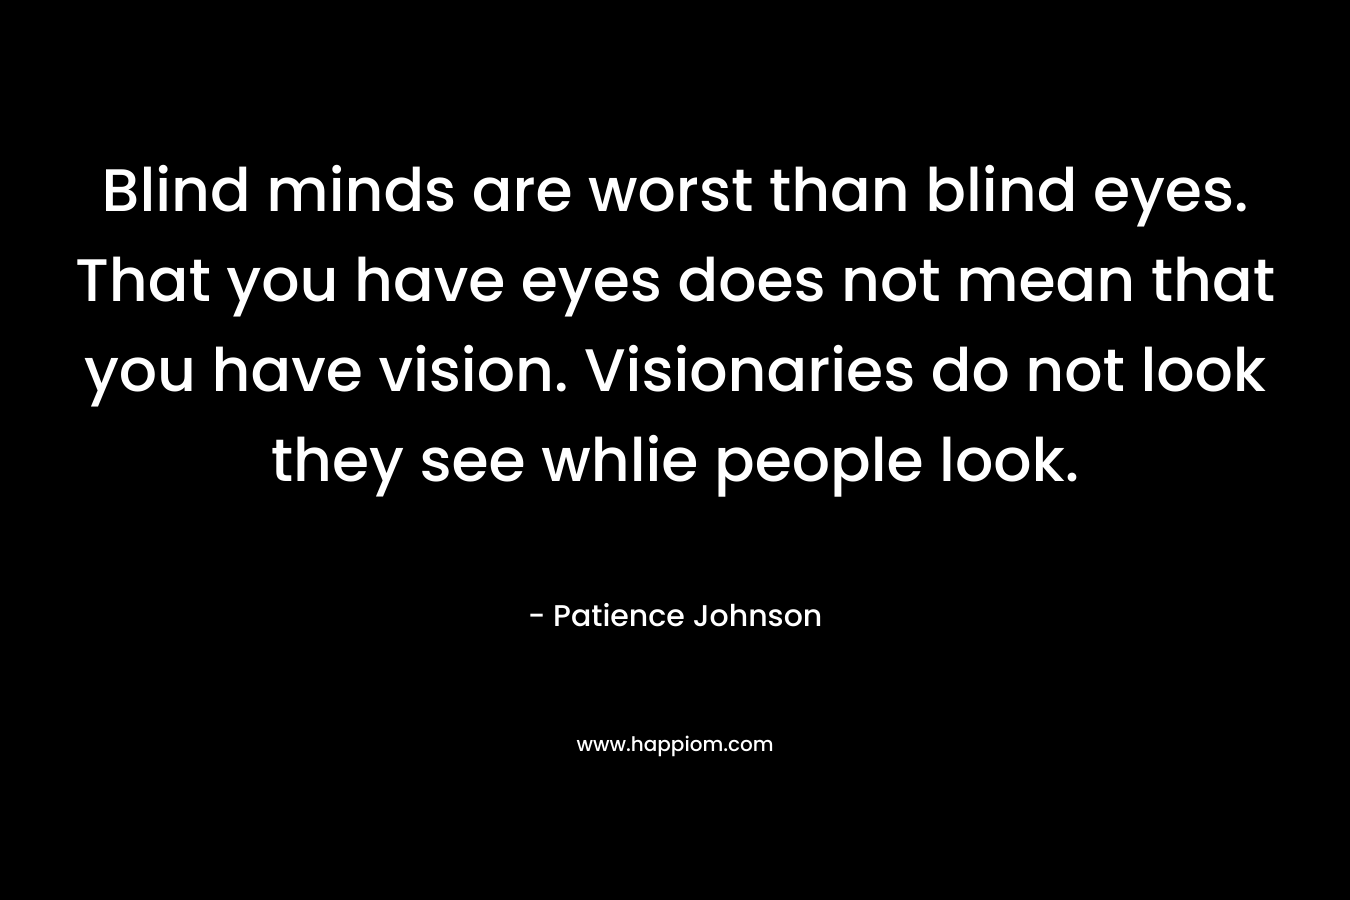 Blind minds are worst than blind eyes. That you have eyes does not mean that you have vision. Visionaries do not look they see whlie people look. – Patience Johnson